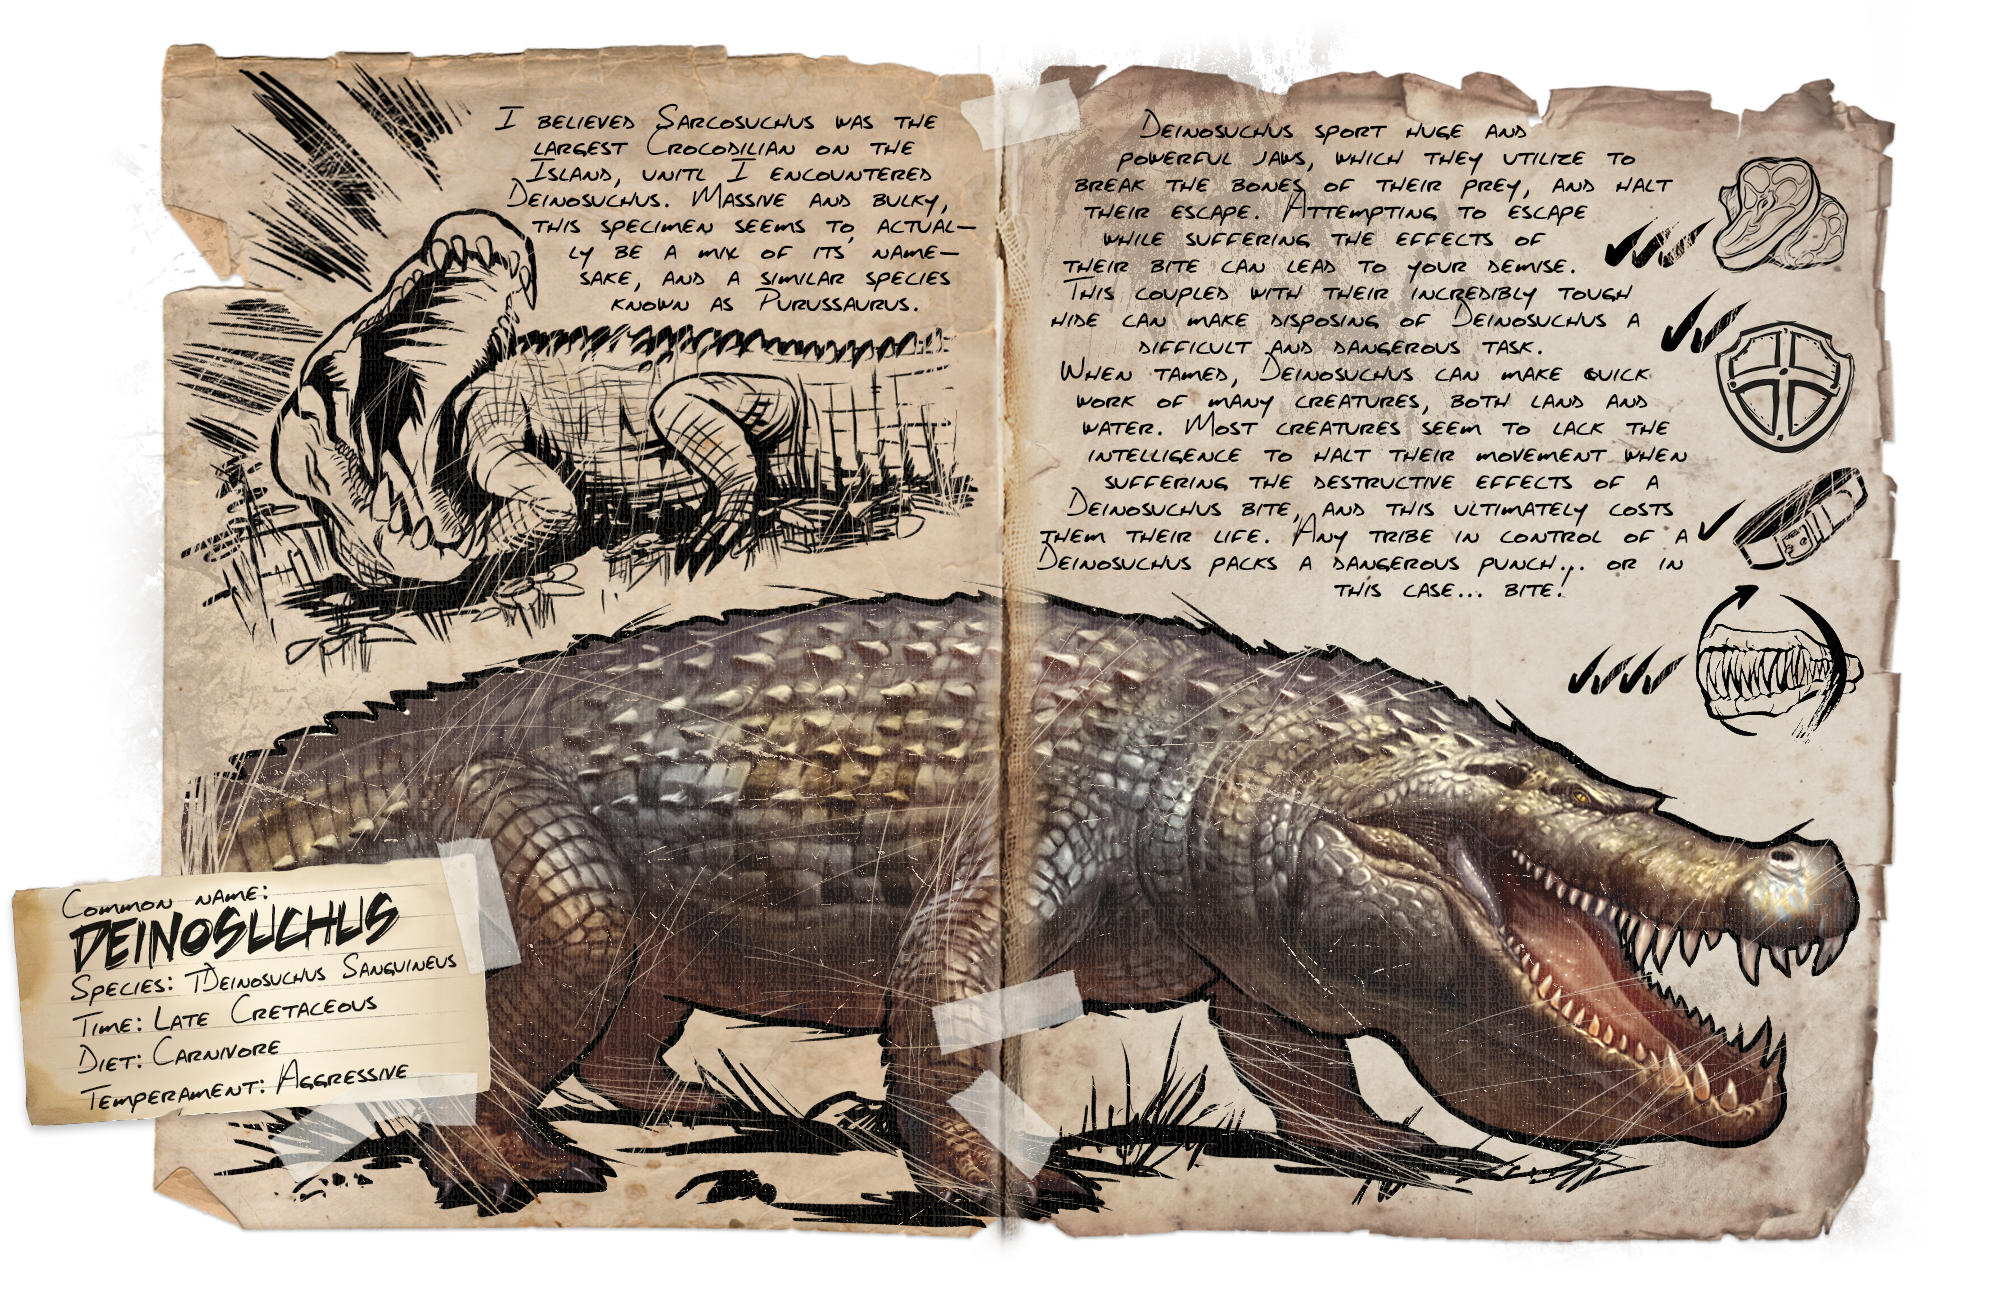 Hail to the cult of Deinosuchus - Creature submission archive